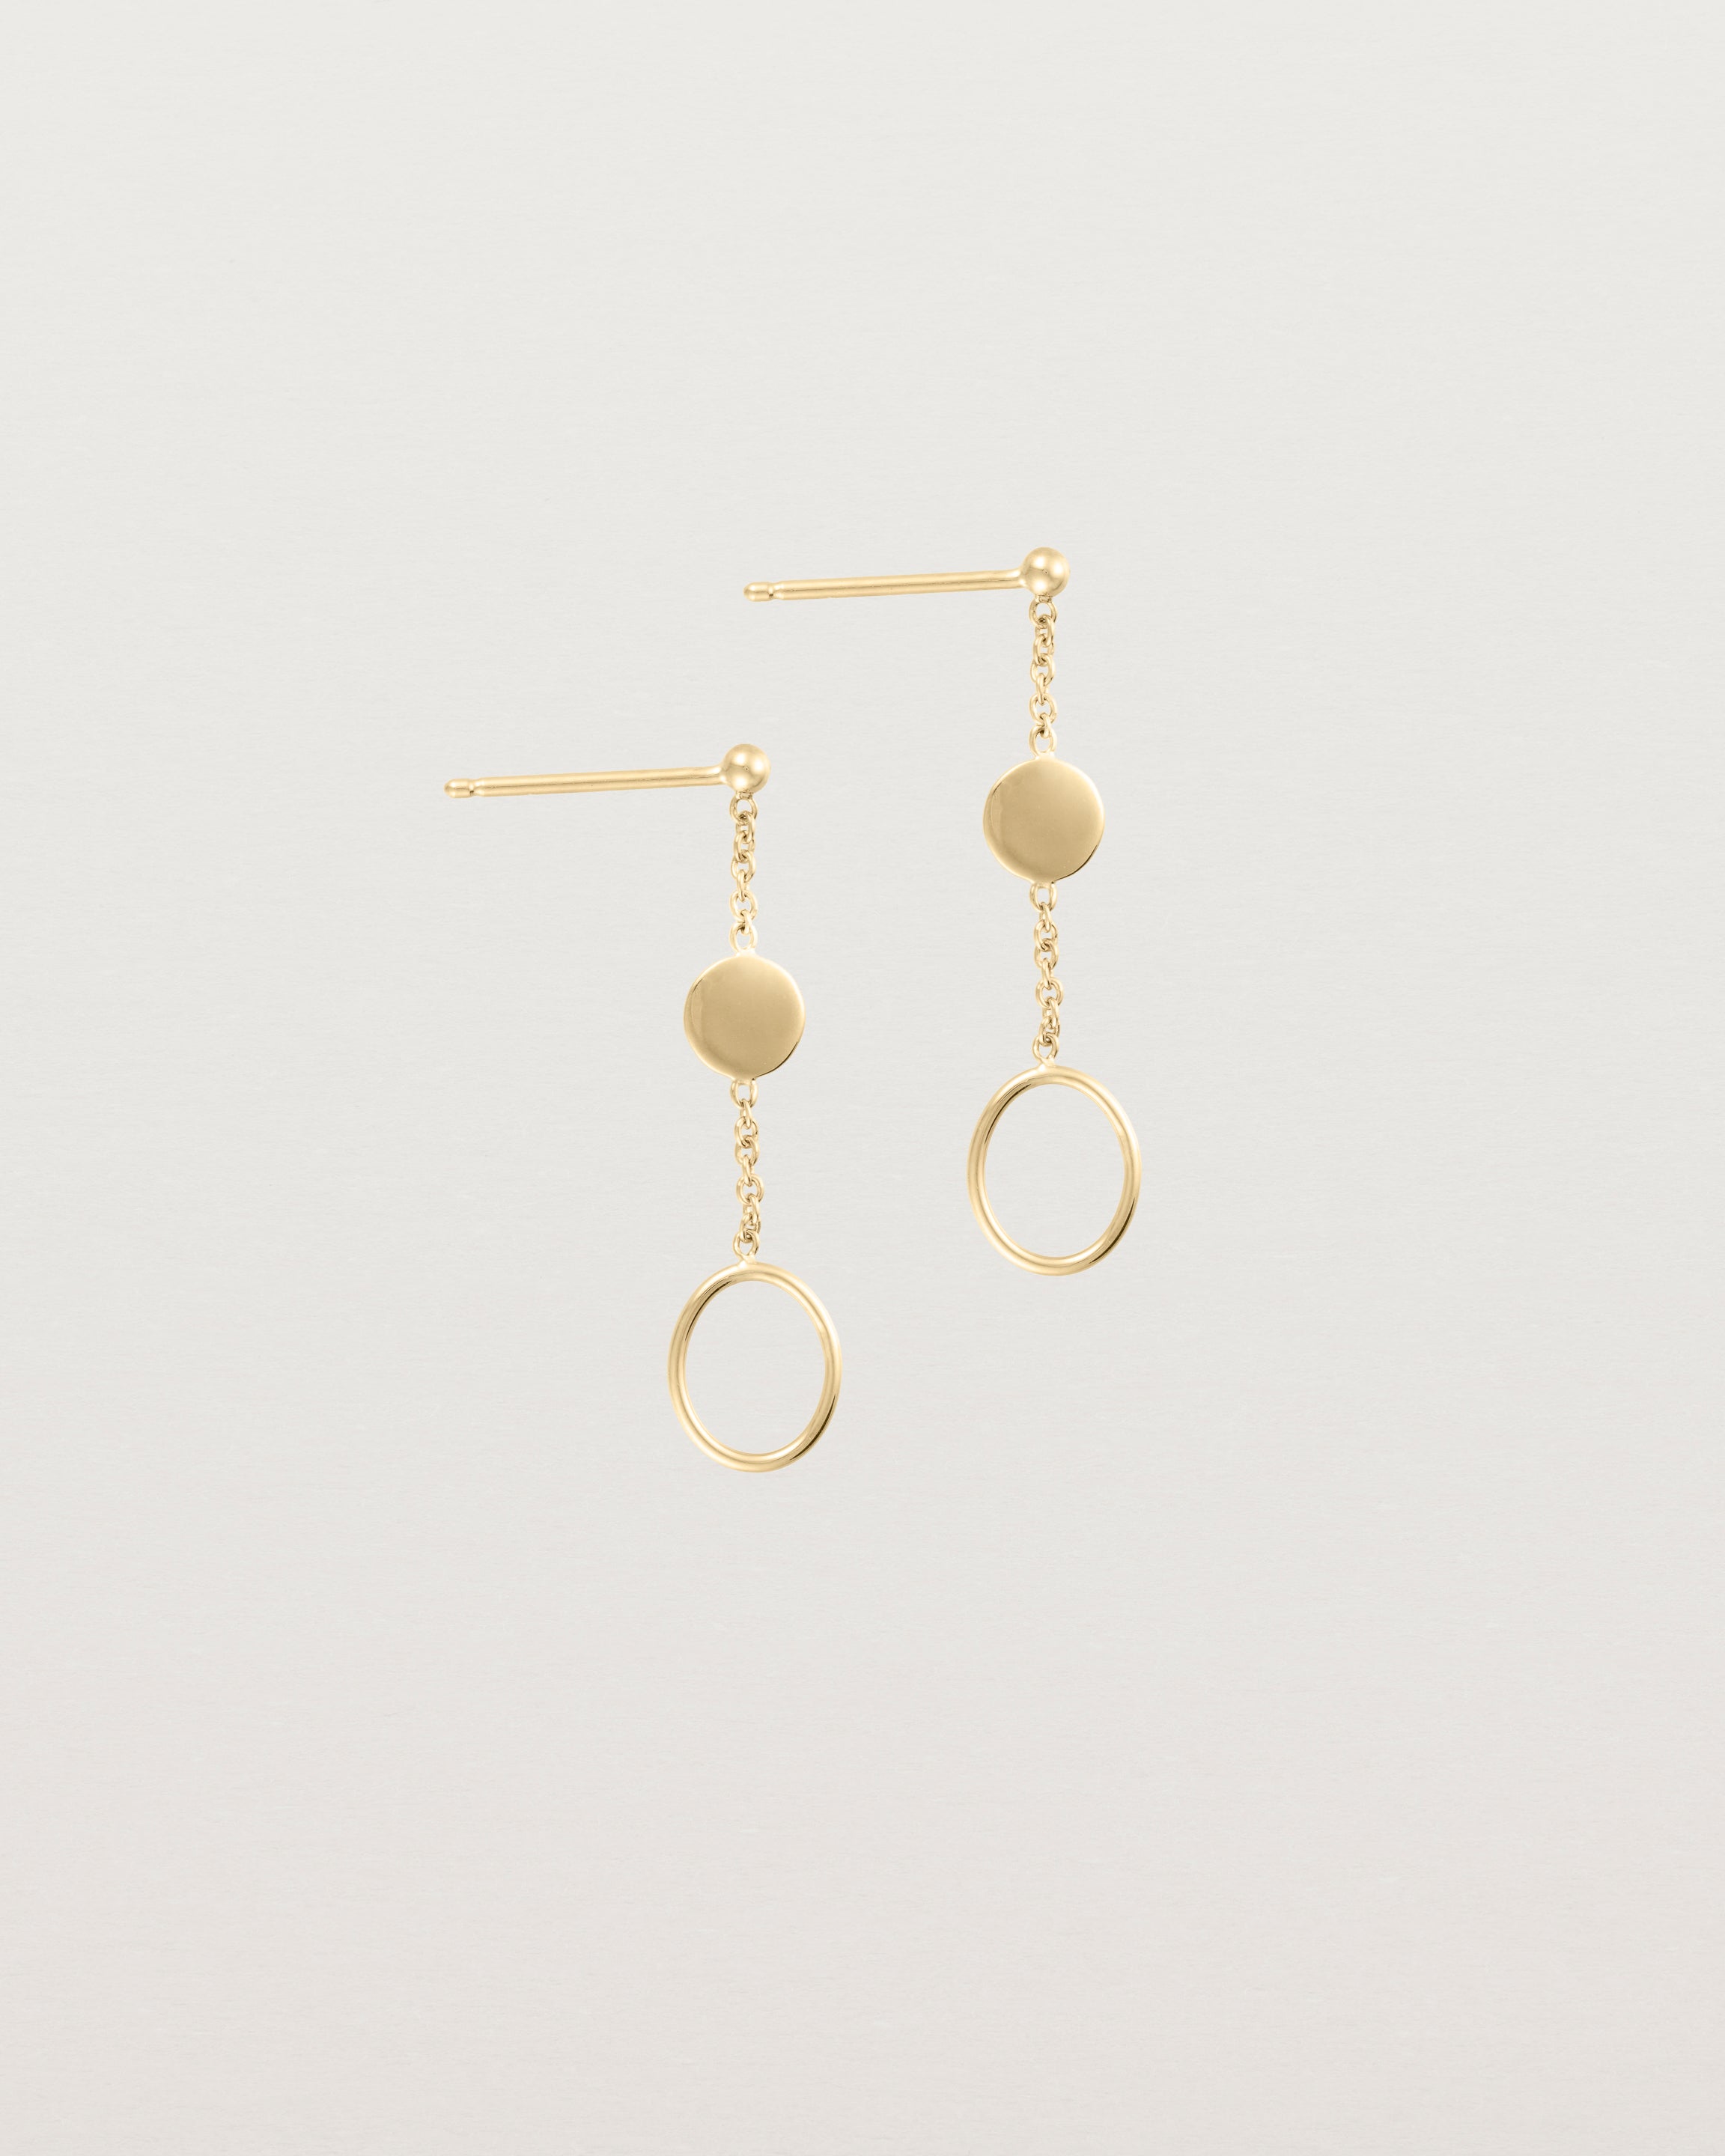 Hanging view of the Aiyana Earrings in Yellow Gold.